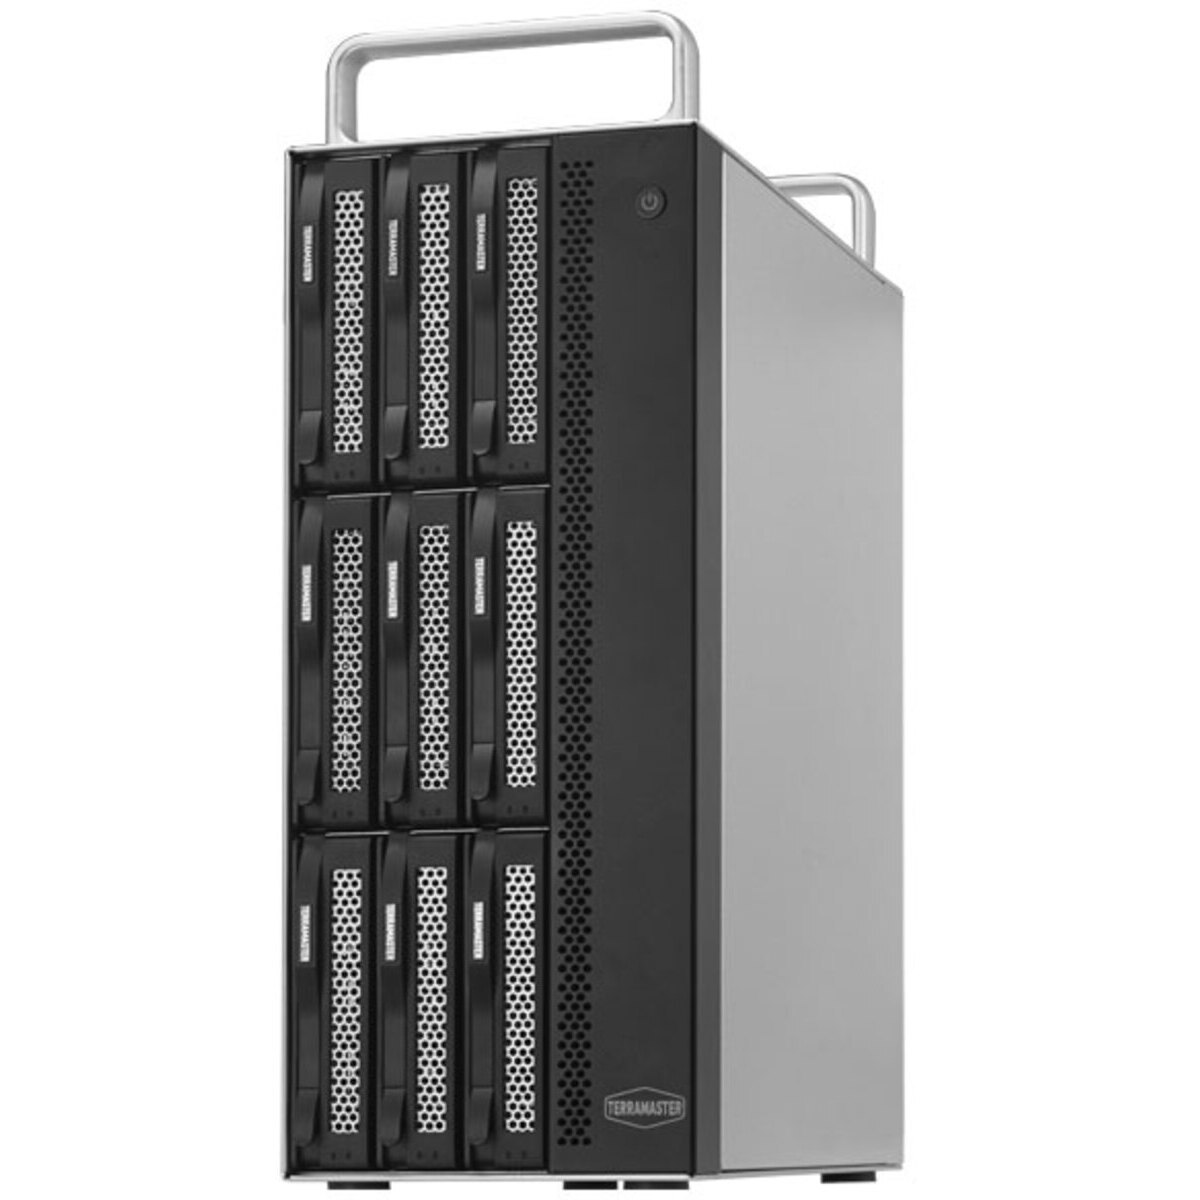 TerraMaster D8-322 20tb 8-Bay Desktop Multimedia / Power User / Business DAS - Direct Attached Storage Device 5x4tb Seagate EXOS 7E10 ST4000NM024B 3.5 7200rpm SATA 6Gb/s HDD ENTERPRISE Class Drives Installed - Burn-In Tested D8-322